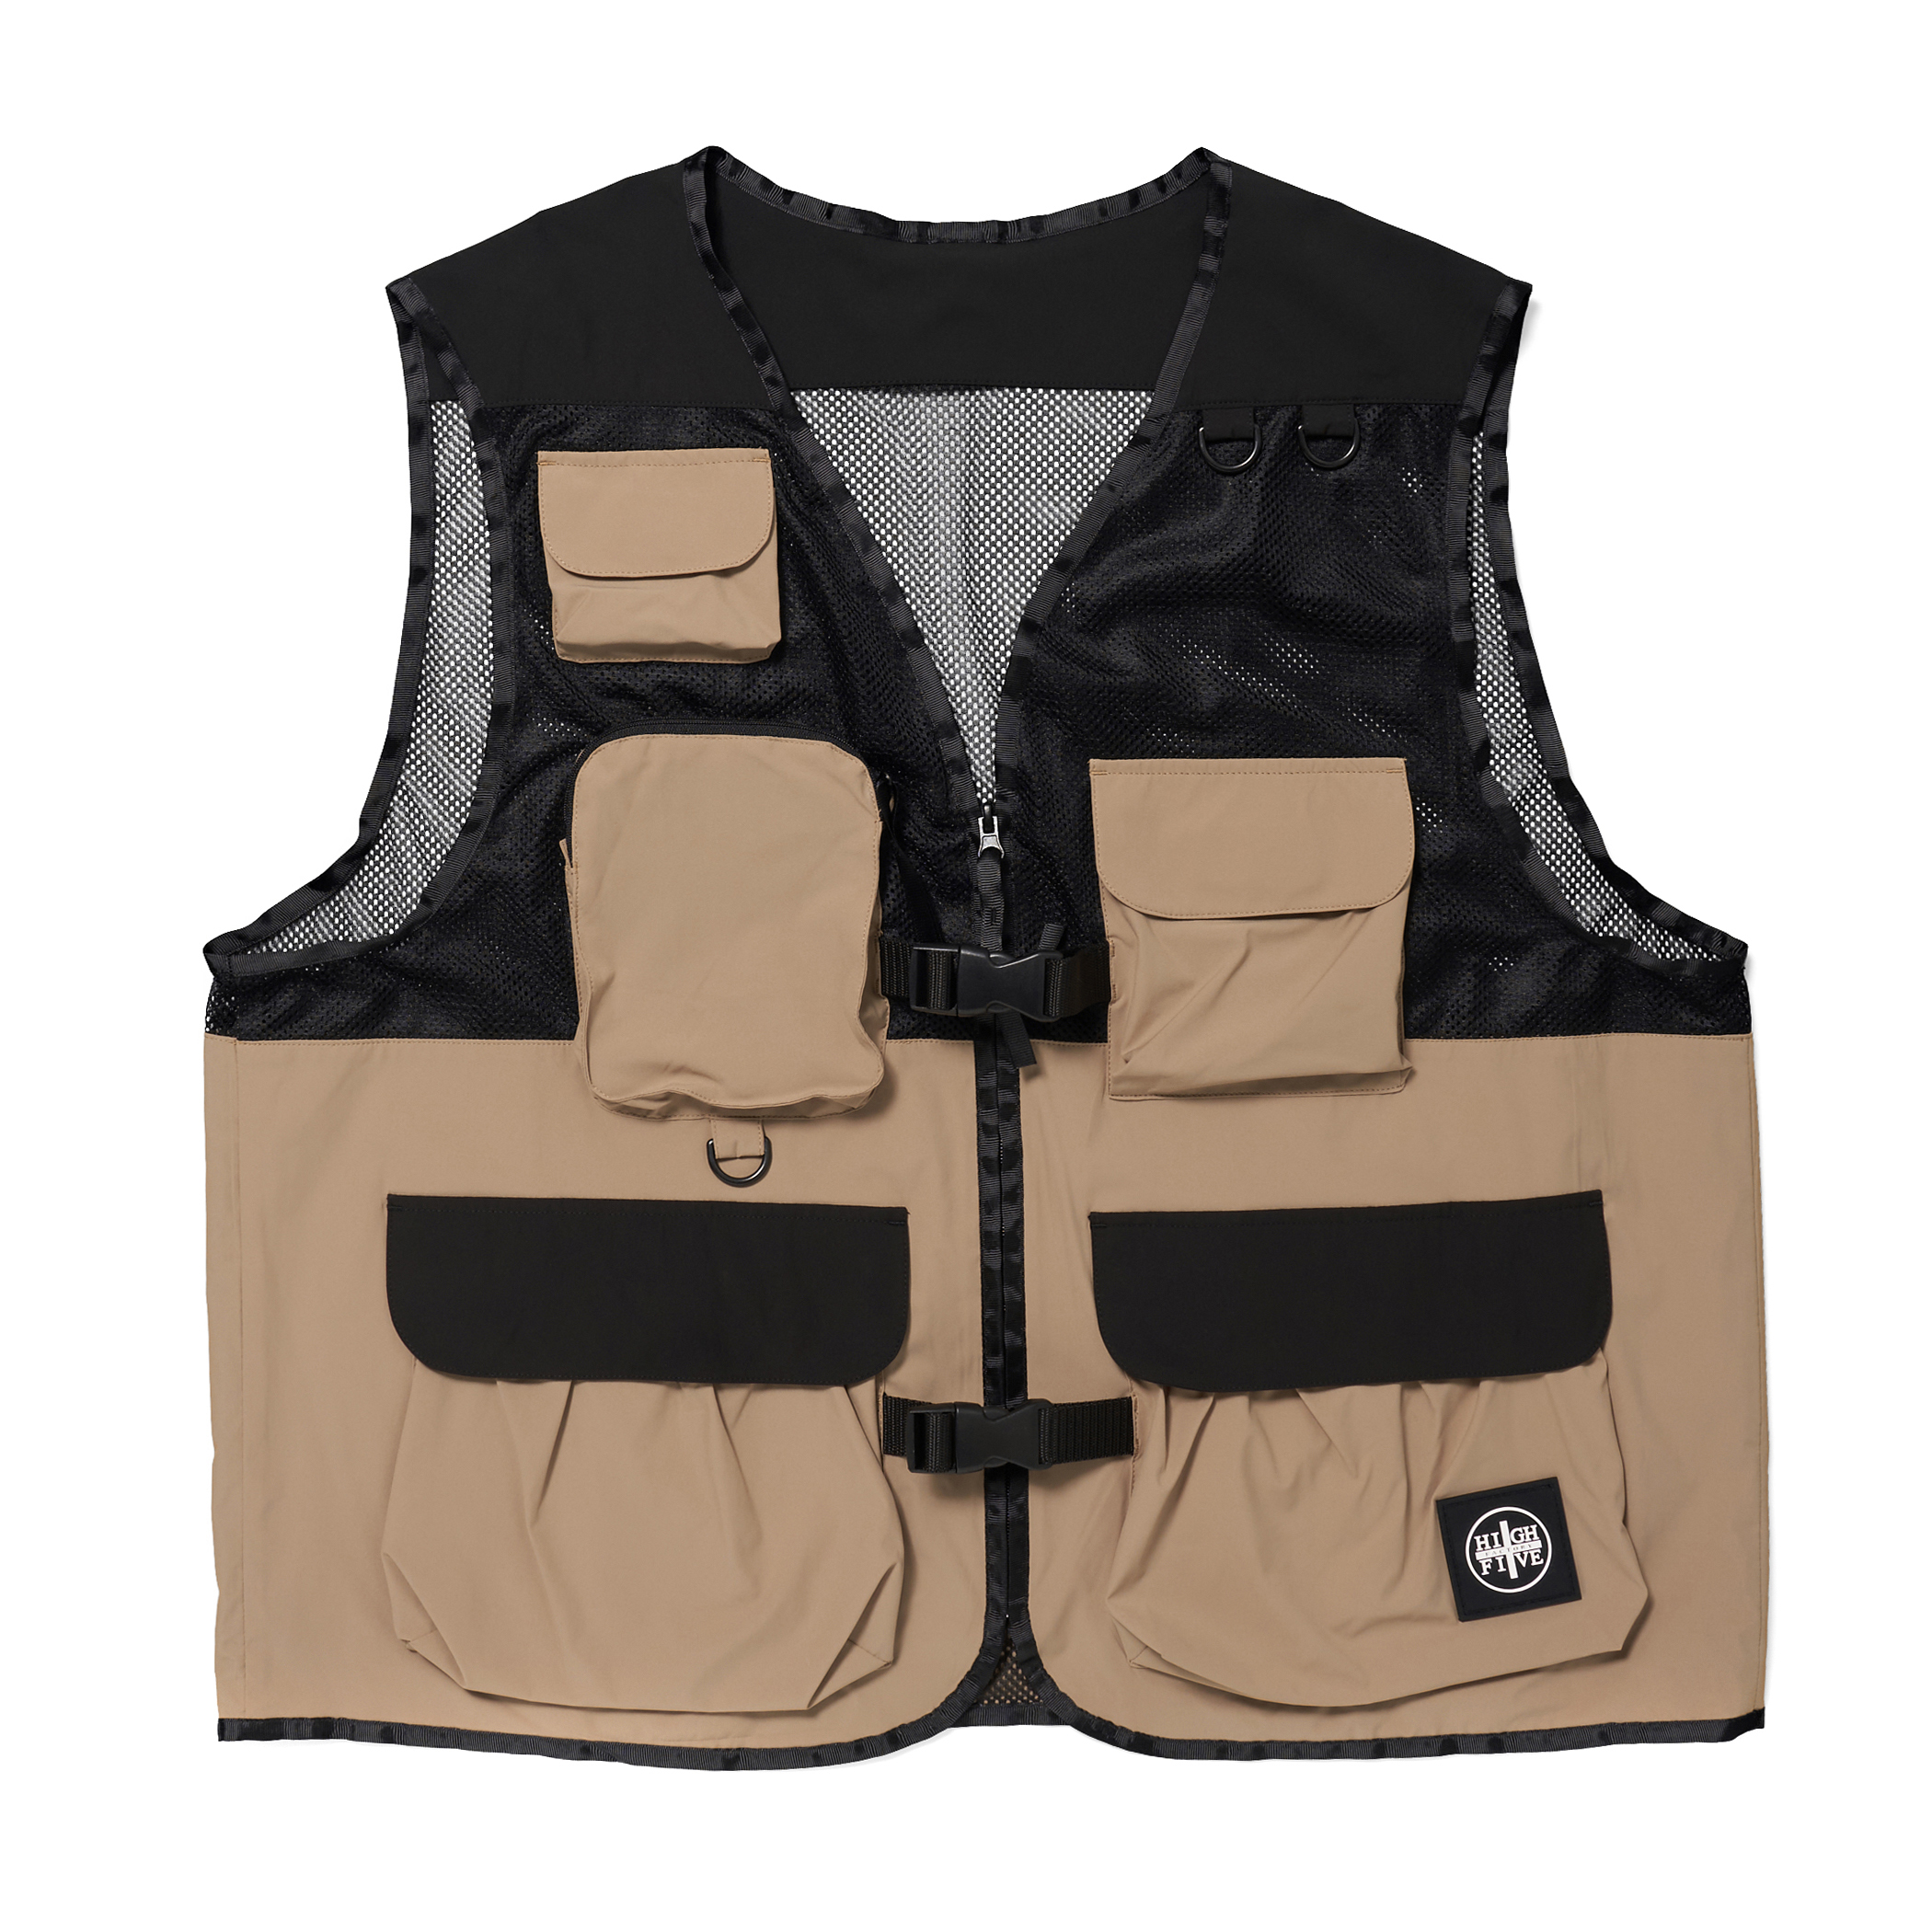 HIGH FIVE FACTORY Fishing Vest | HIGH FIVE FACTORY（ハイ